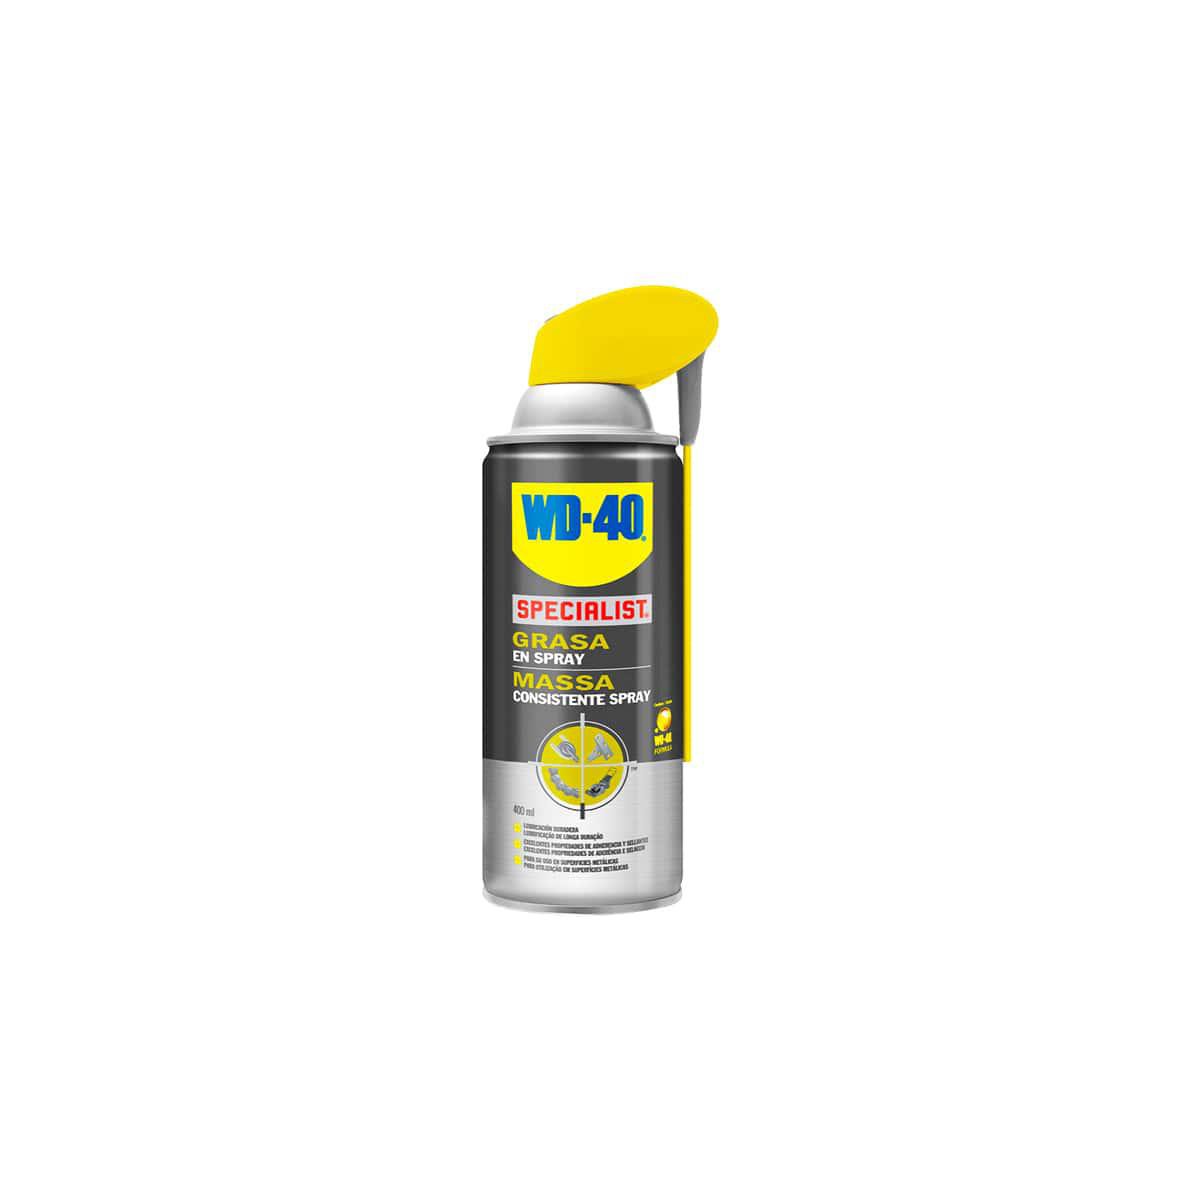 Wd40 - Graisse WD40 spray 400ml - Mastic, silicone, joint